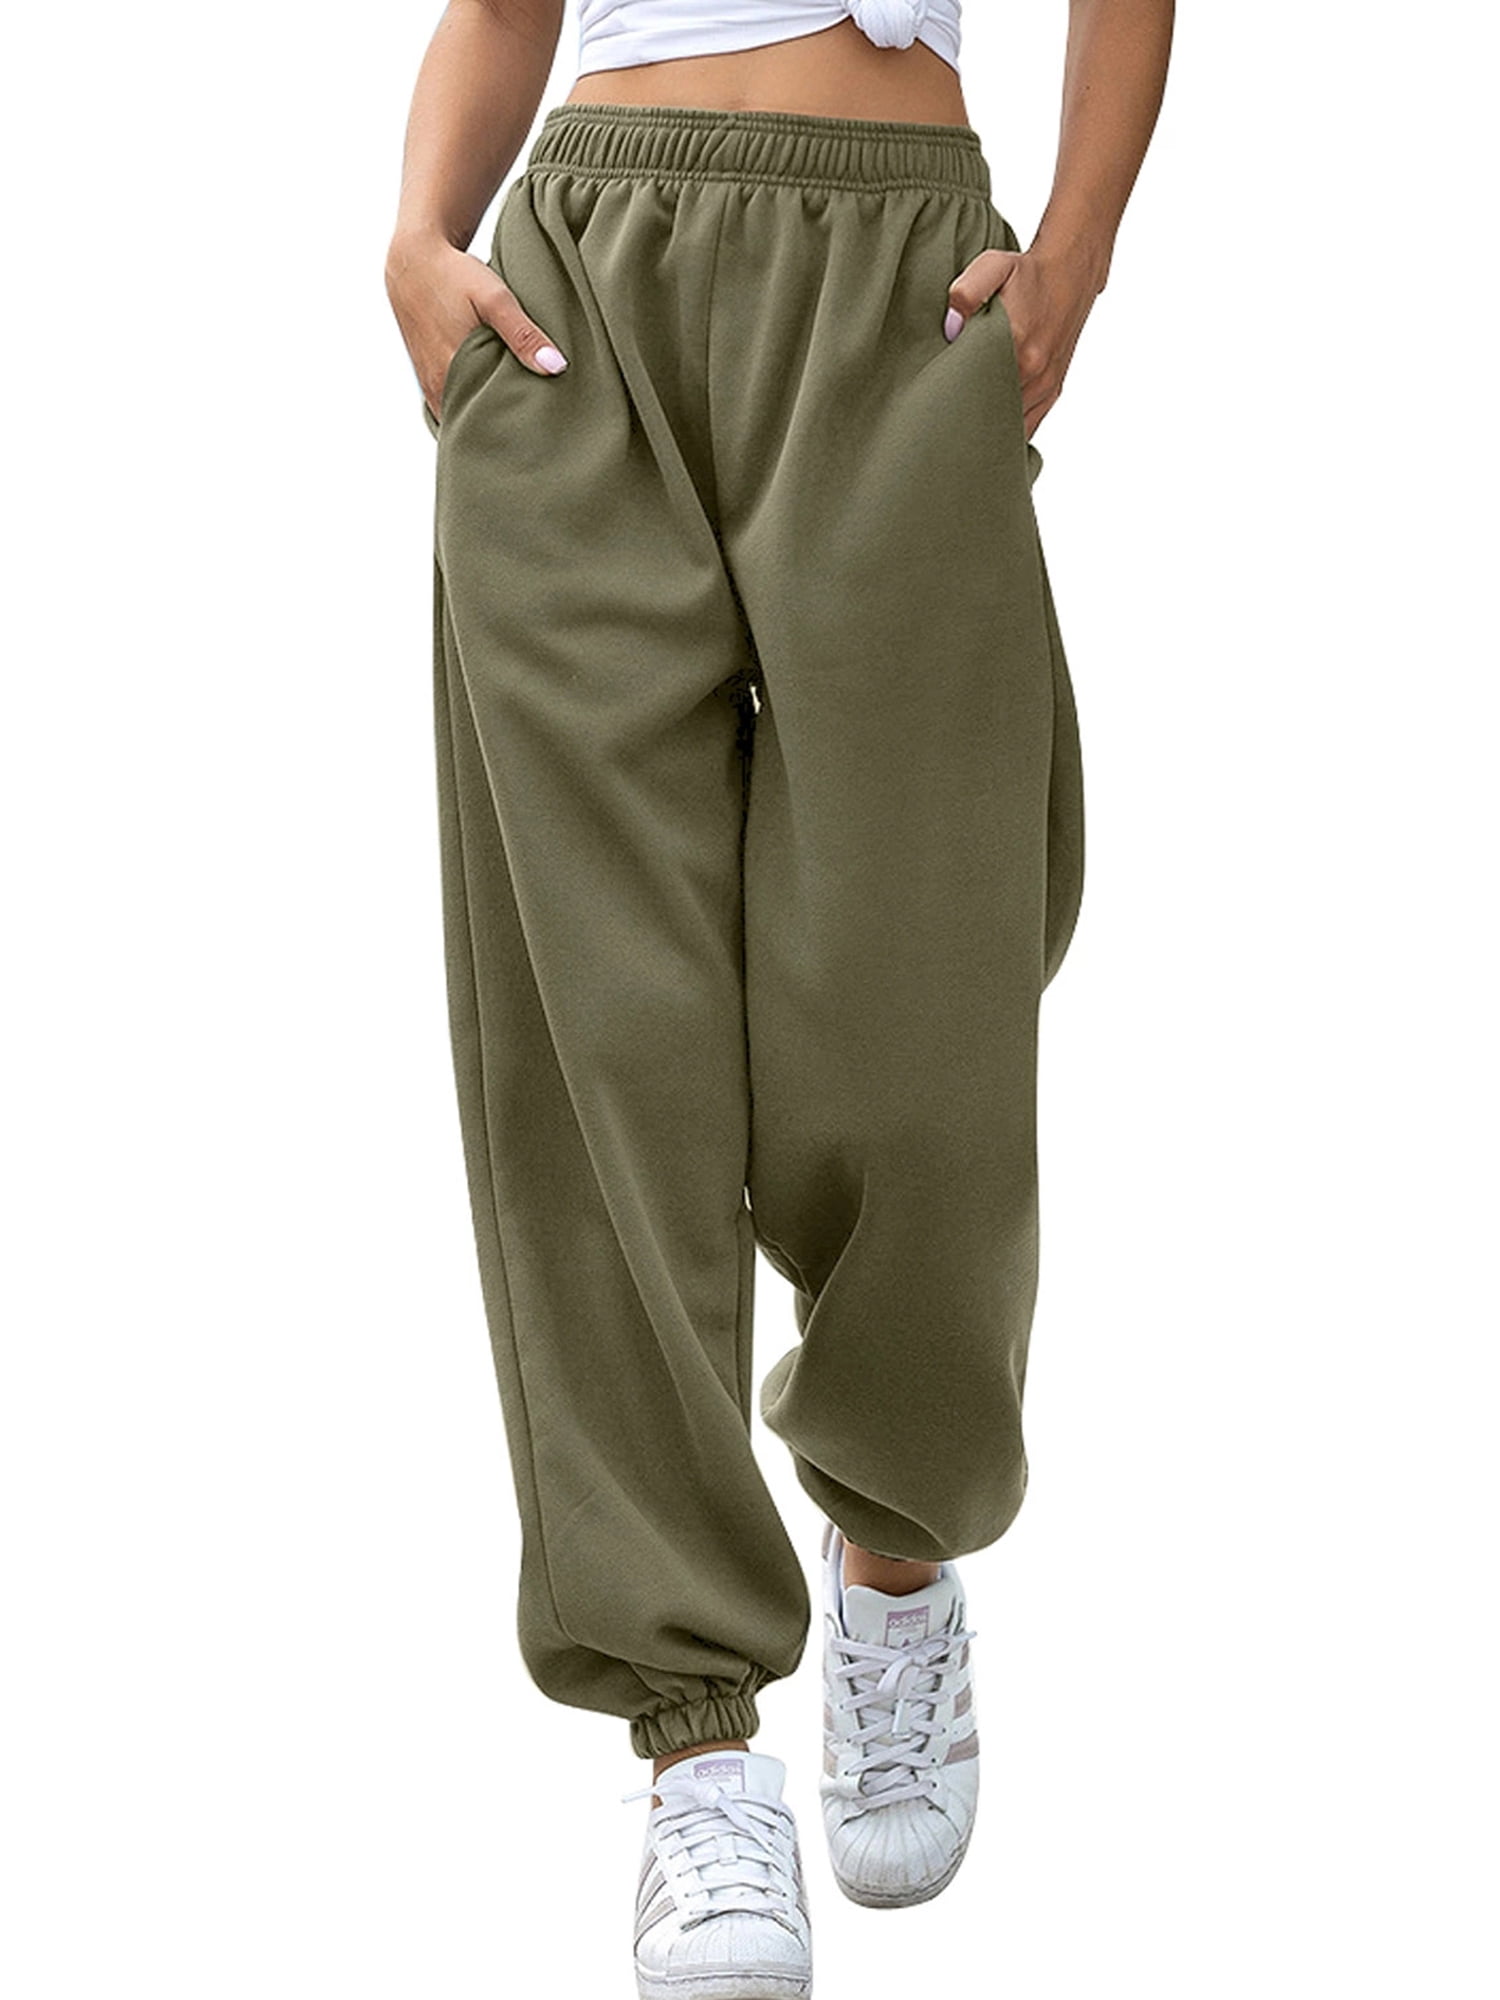 Lu Quick Dry Drawstring All In Motion Joggers For Women And Men Perfect For  Sport, Yoga, Gym, And Casual Wear With Elastic Waist And Pockets From  September887, $50.77